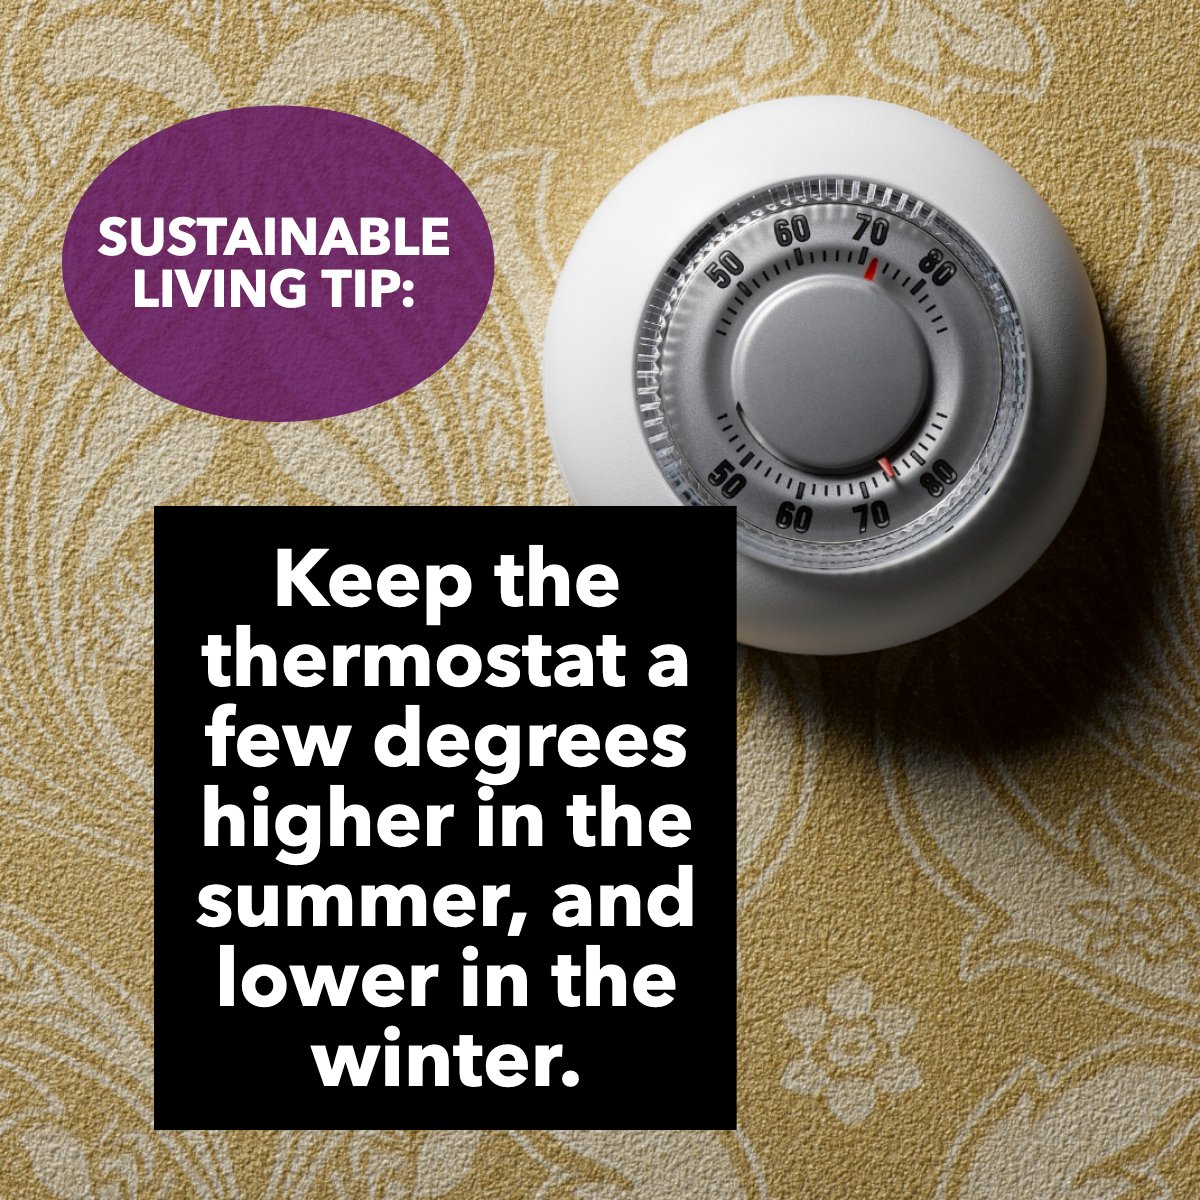 Here is a useful tip! 

Let's try it this and every season! ❄️

#sustainablelifestyle    #sustainable    #sustainablity    #thermostat